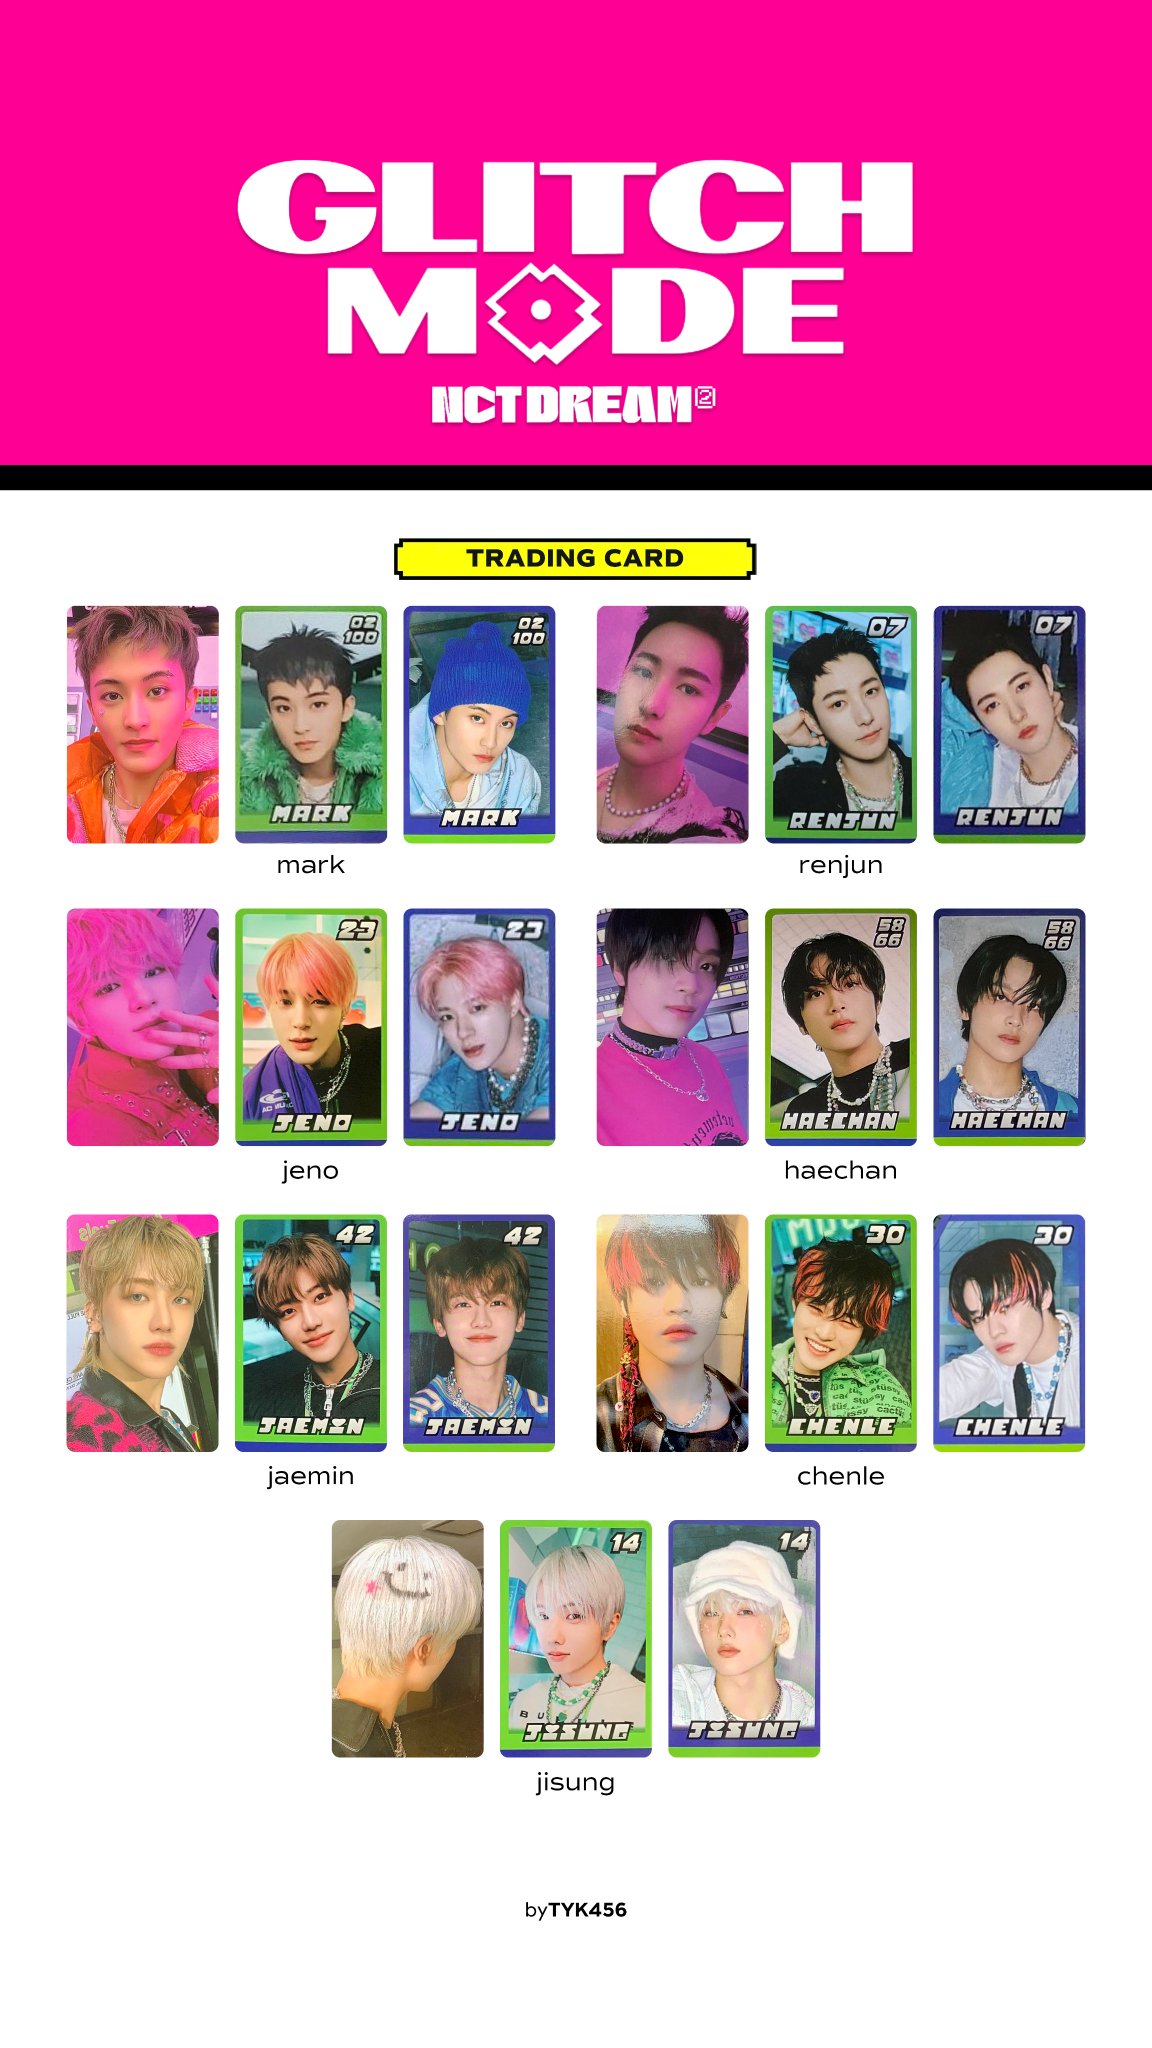 t 🌸 on Twitter: "NCT Dream Glitch Mode pop-up store trading card